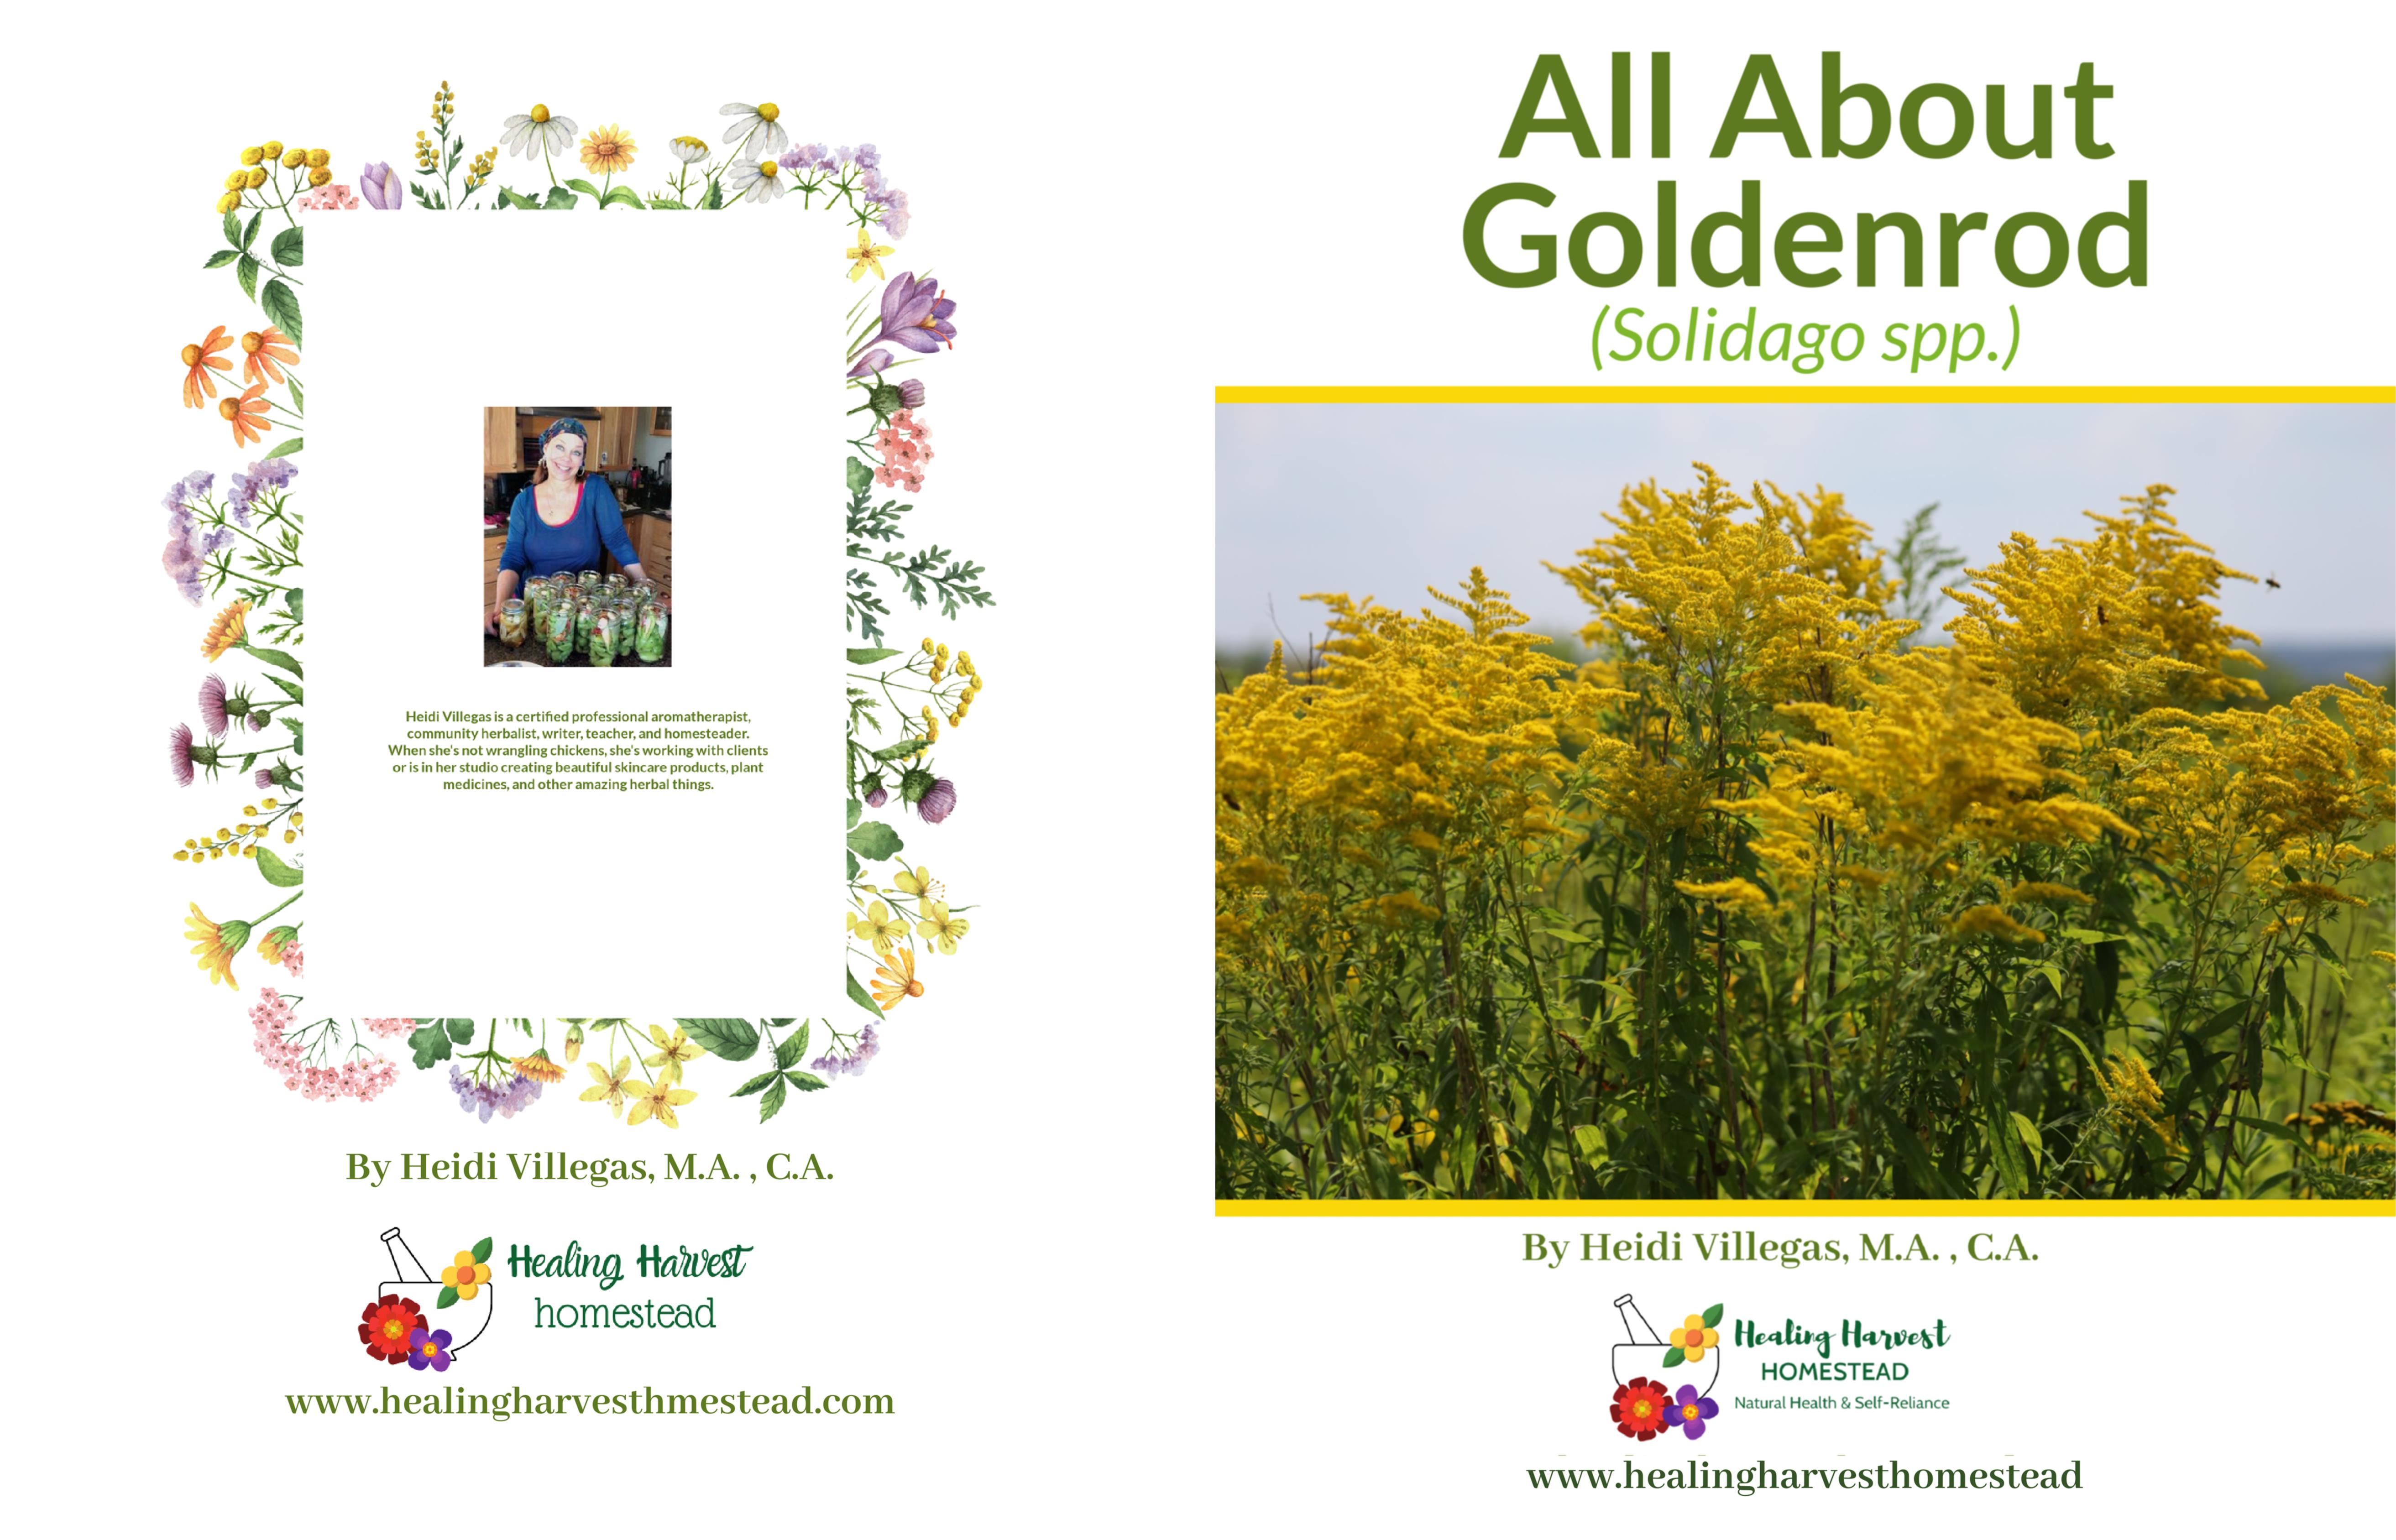 All About Goldenrod cover image